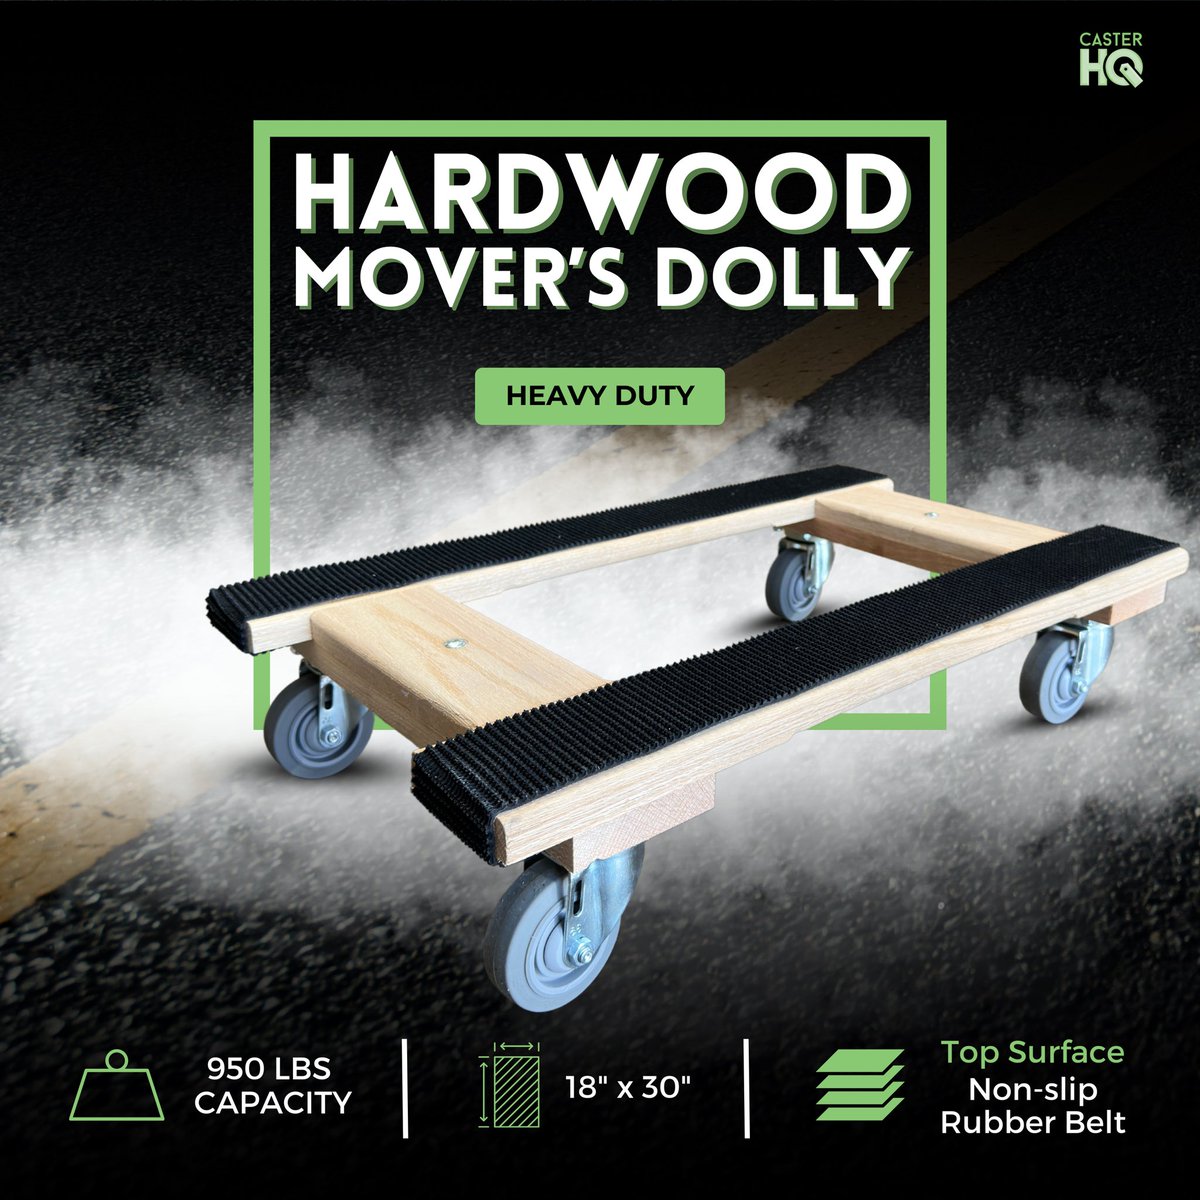 🚚 Moving heavy furniture? Make it easier with our premium Wooden Furniture Dollies! Solid red oak, 950 lbs capacity, and non-slip rubber belts for secure transportation. Upgrade your moving game with #CasterHQ! Check it out here: bit.ly/WoodFurnitureD… #MovingSolutions